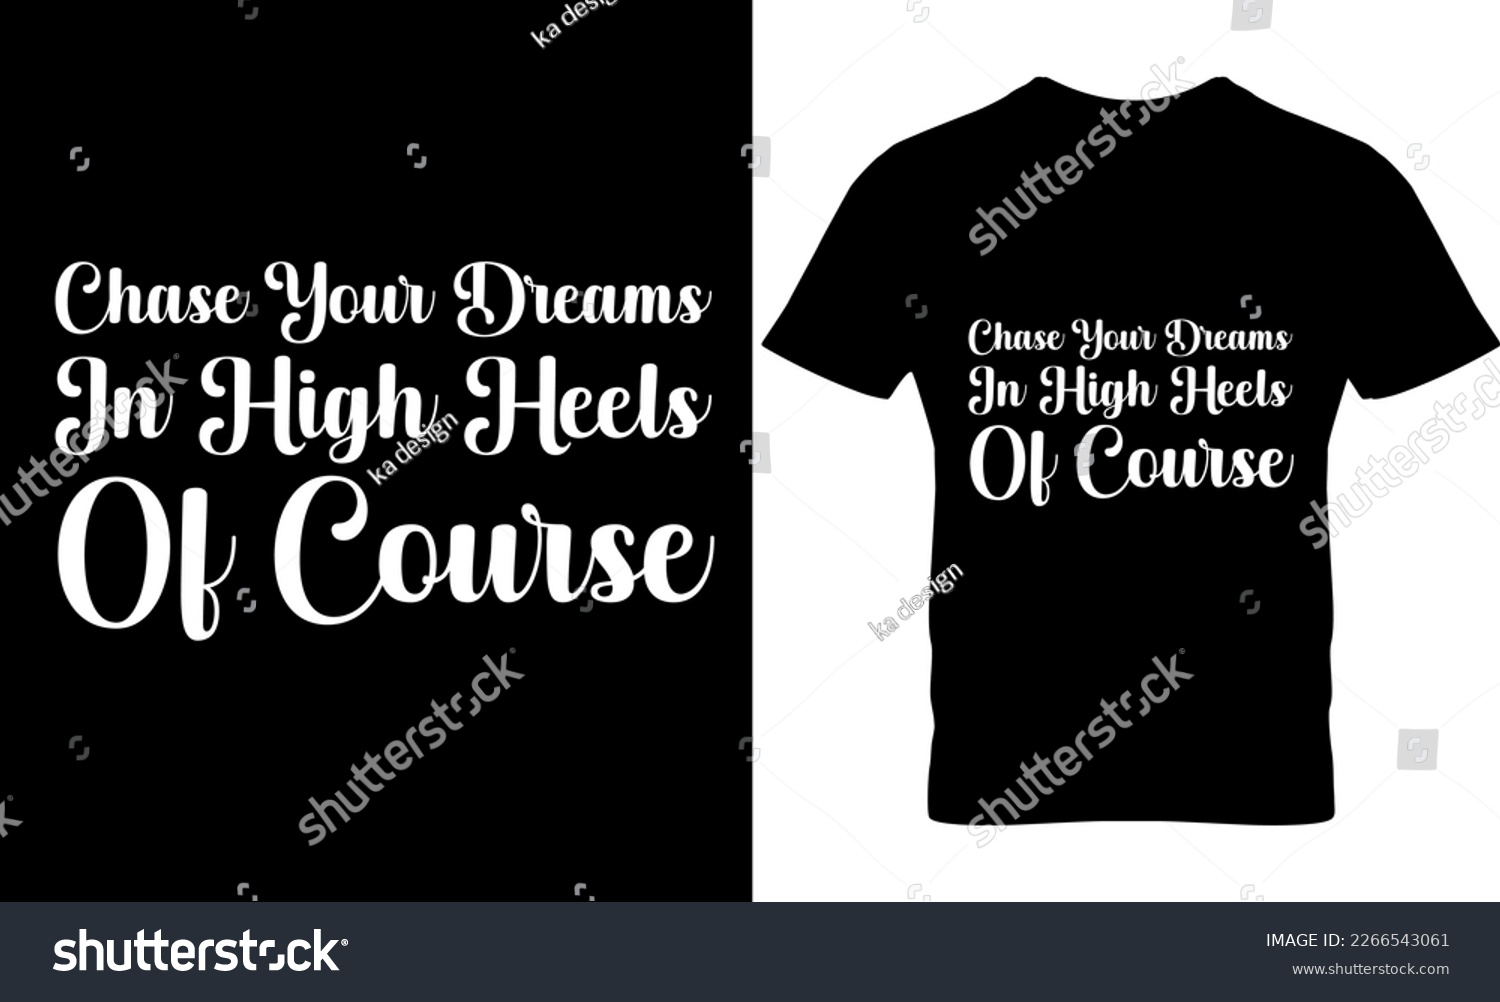 SVG of Chase Your Dreams In High Heels Of Course, Graphic, illustration, vector, typography, motivational, inspiration, inspiration t-shirt design, Typography t-shirt design, motivational t-shirt design, svg